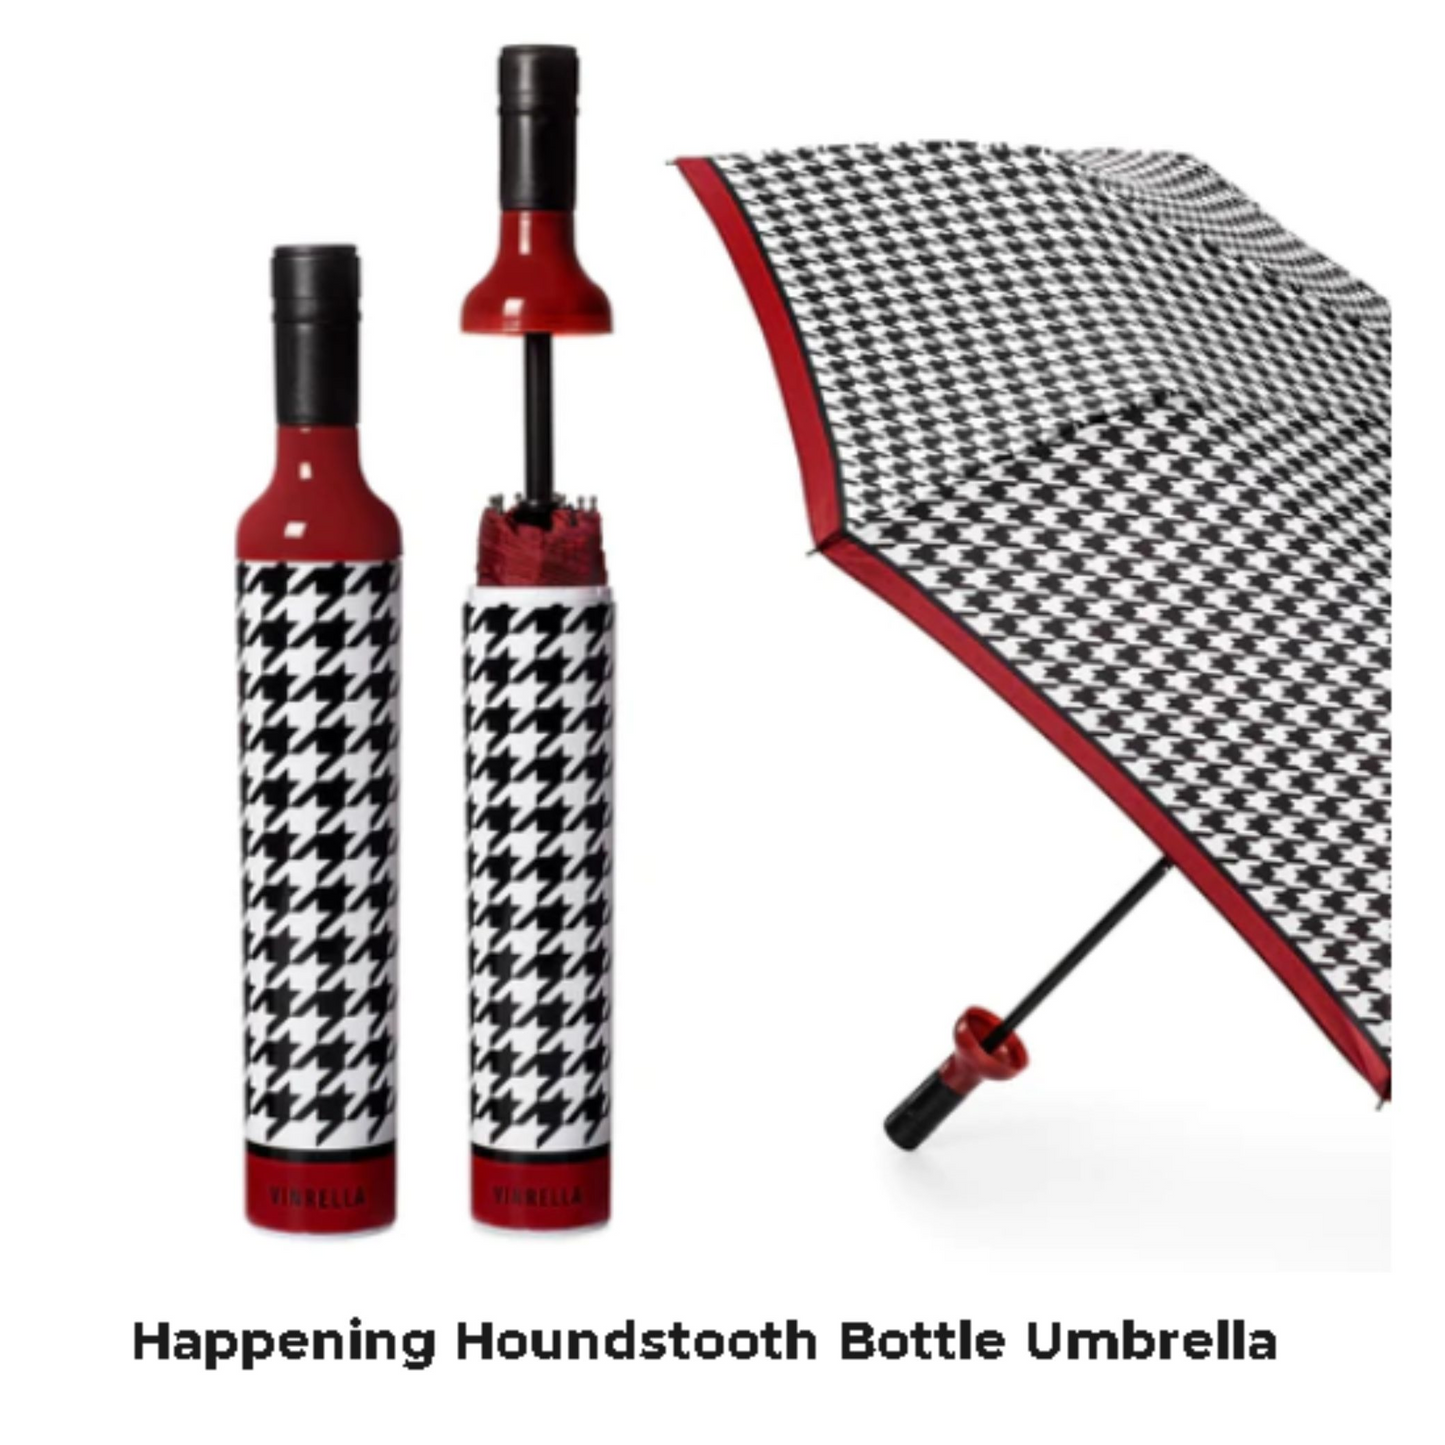 Umbrella Houndstooth Black and Red